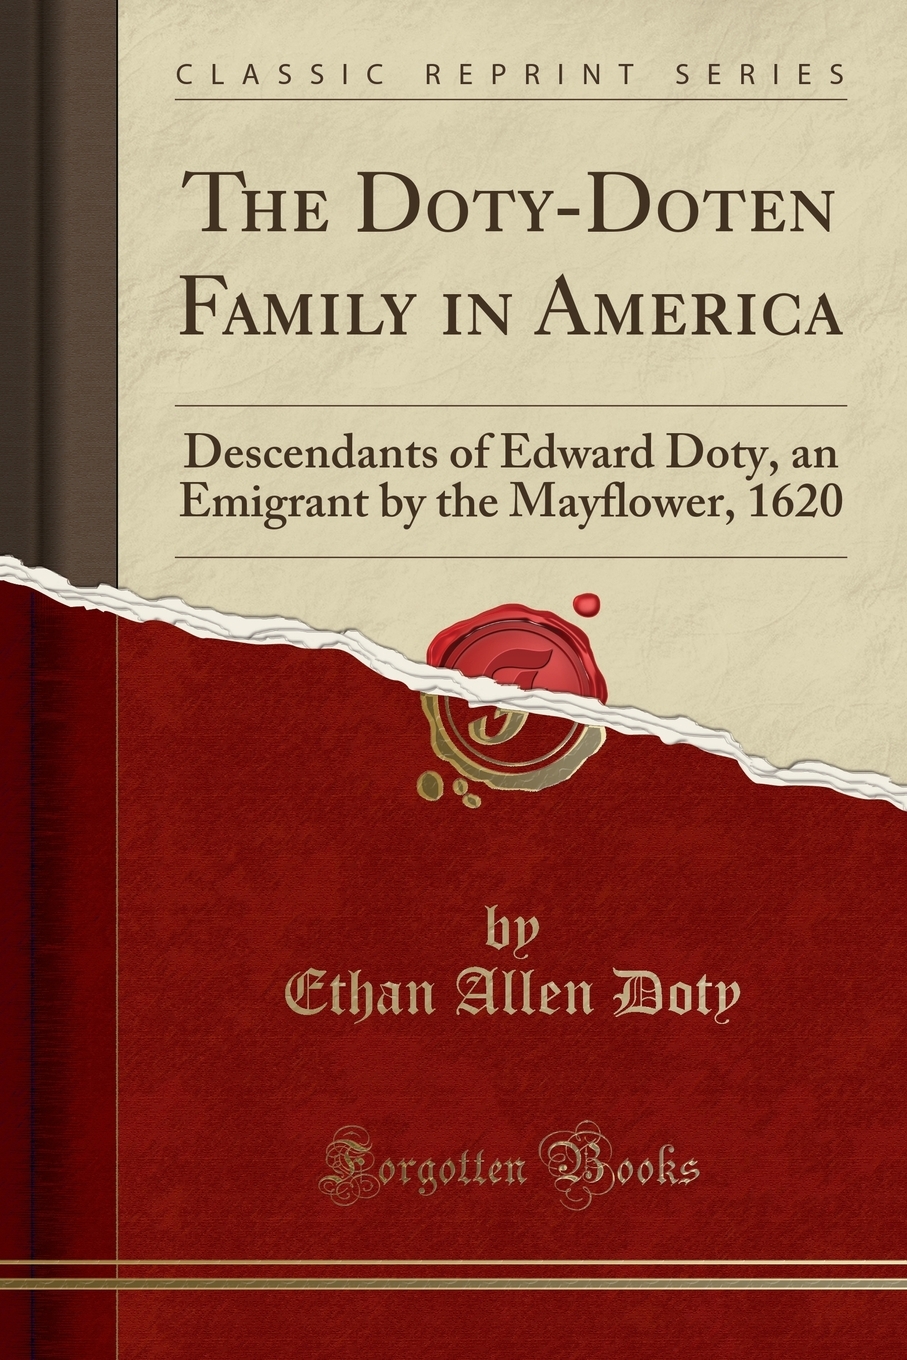 The　Edward　Descendants　in　Emigrant　(Classic　Reprint)　Doty,　an　Mayflower,　America　the　1620　of　Family　Doty-Doten　by